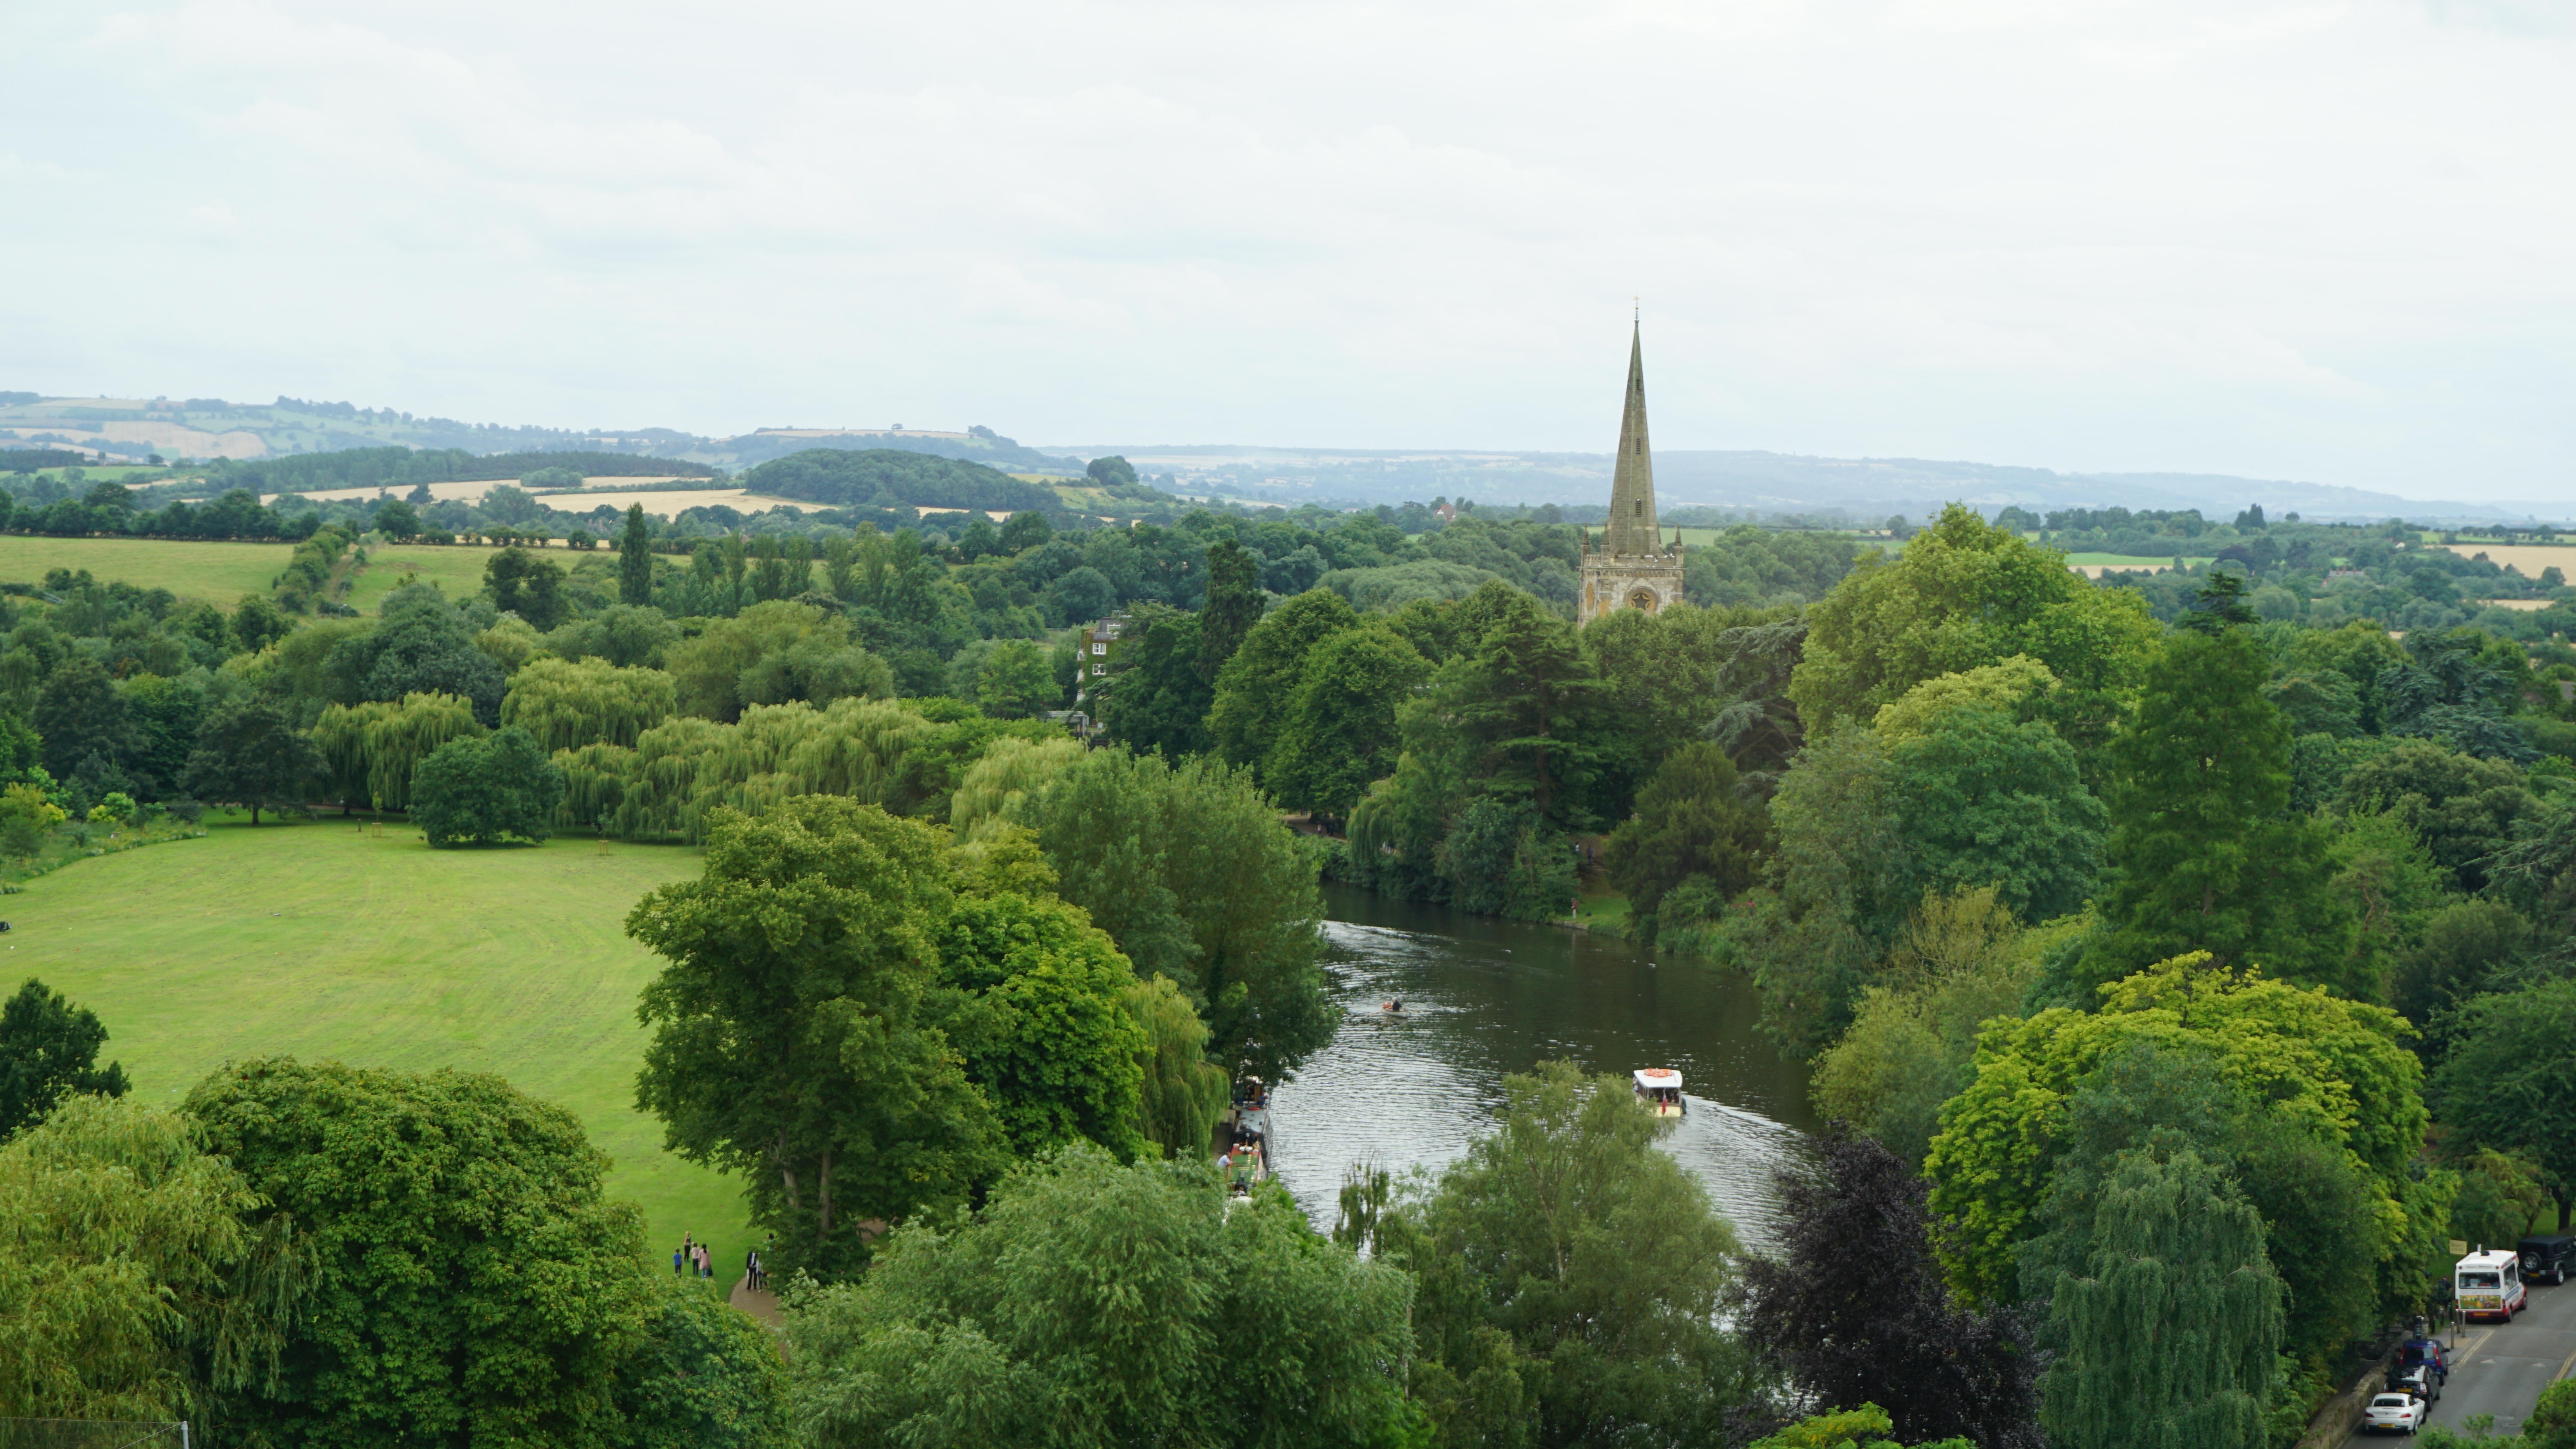 View of the River Avon from the Tower of the Royal Shakespeare Company, Stratford-Upon-Avon